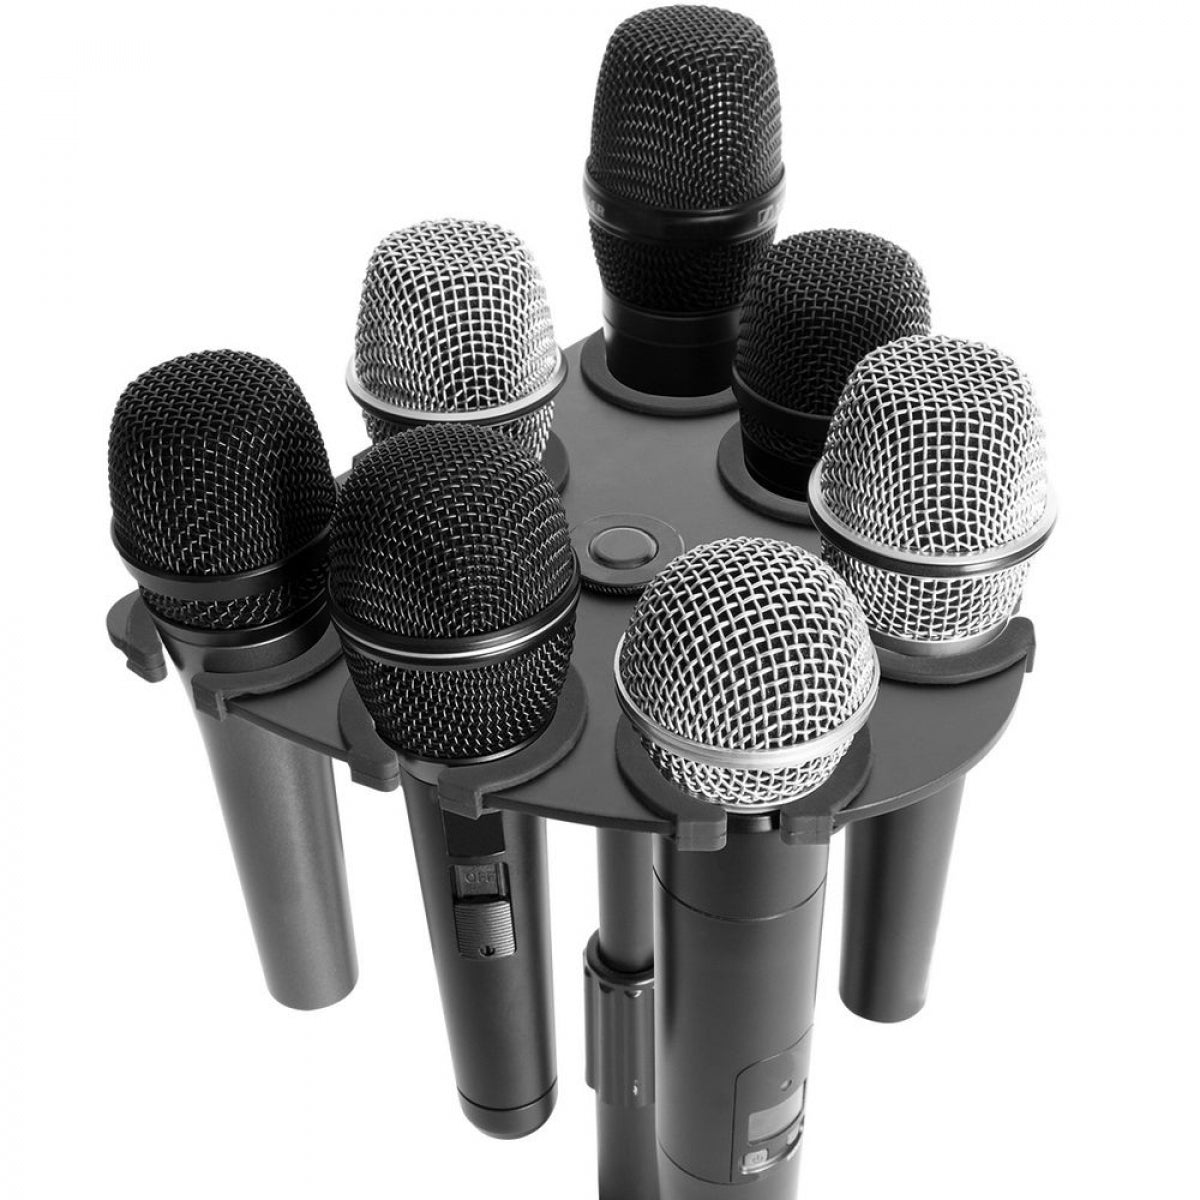 On-Stage MSA2700 Multi-Mic Holder Holds up to 7 Handheld Microphones